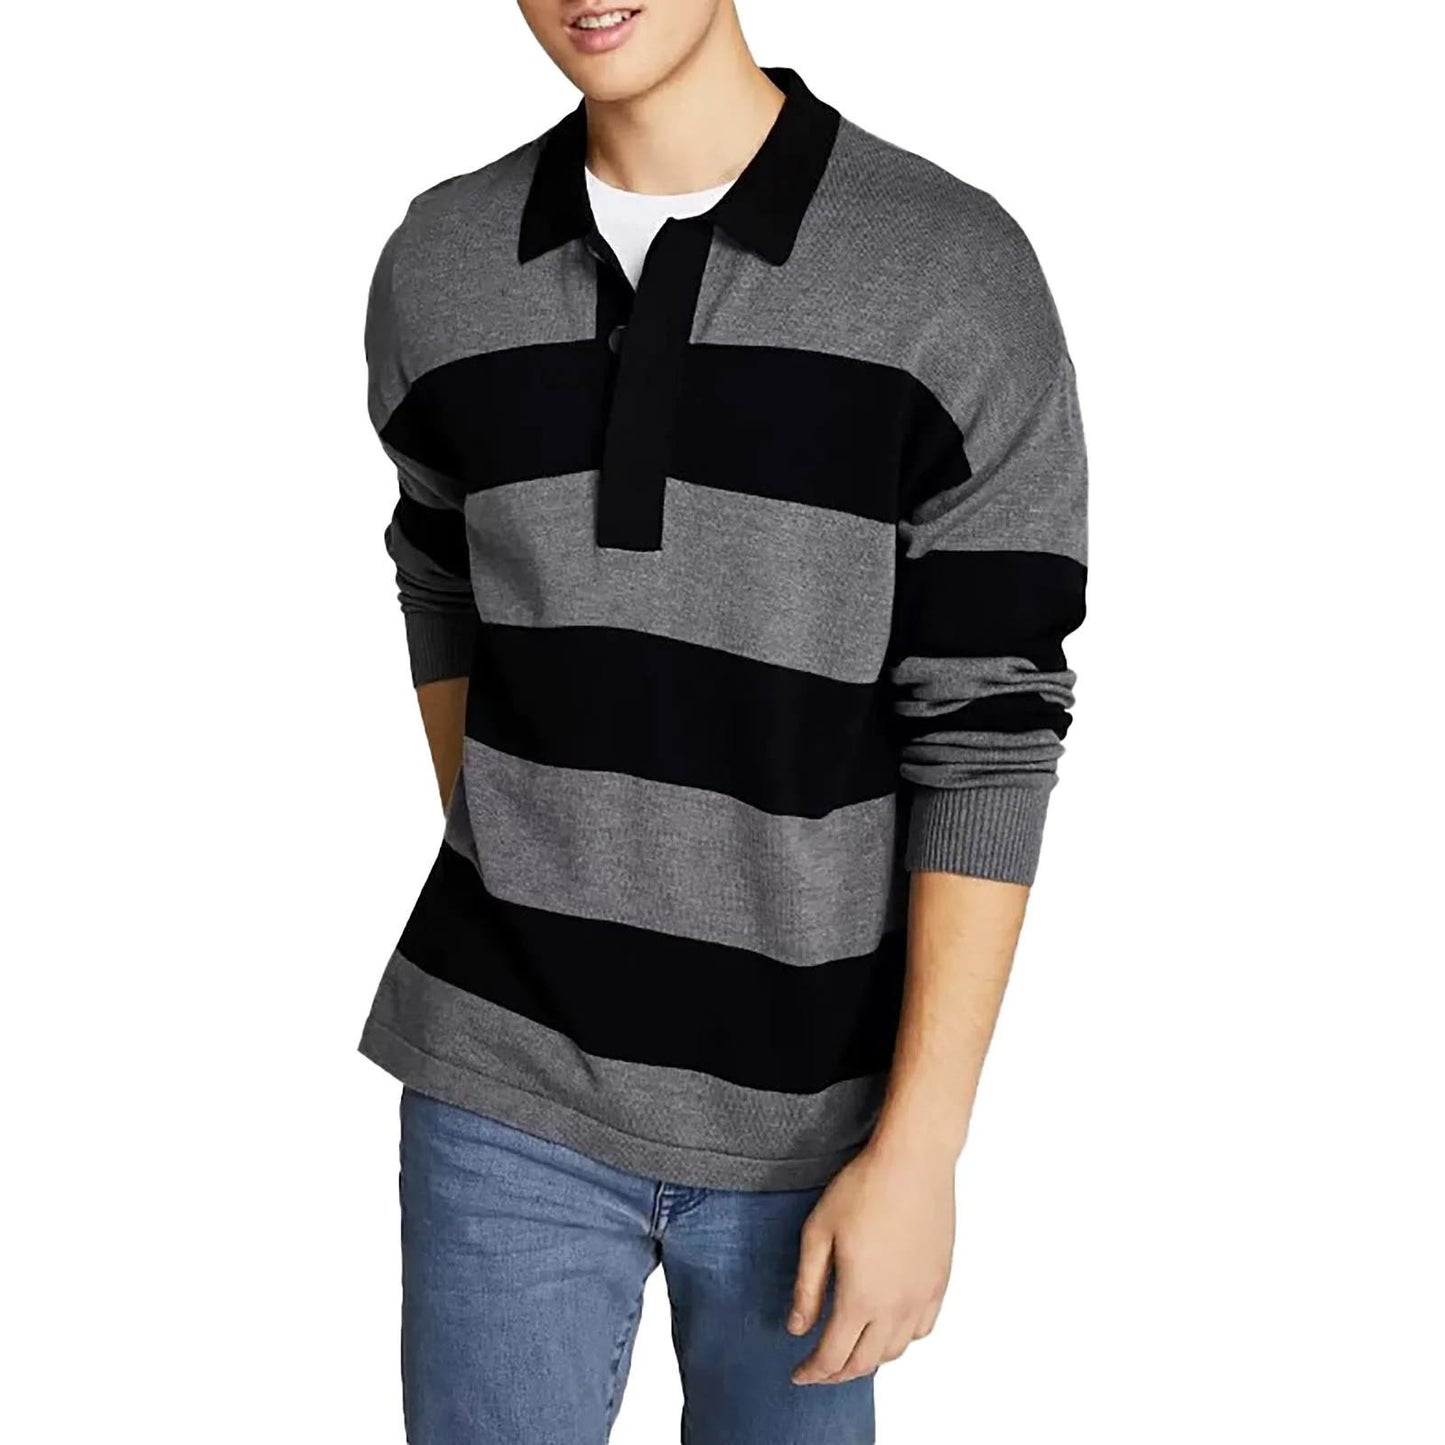 AND NOW THIS Men's Gray & Black Knit Striped Pullover Sweater, Size XL